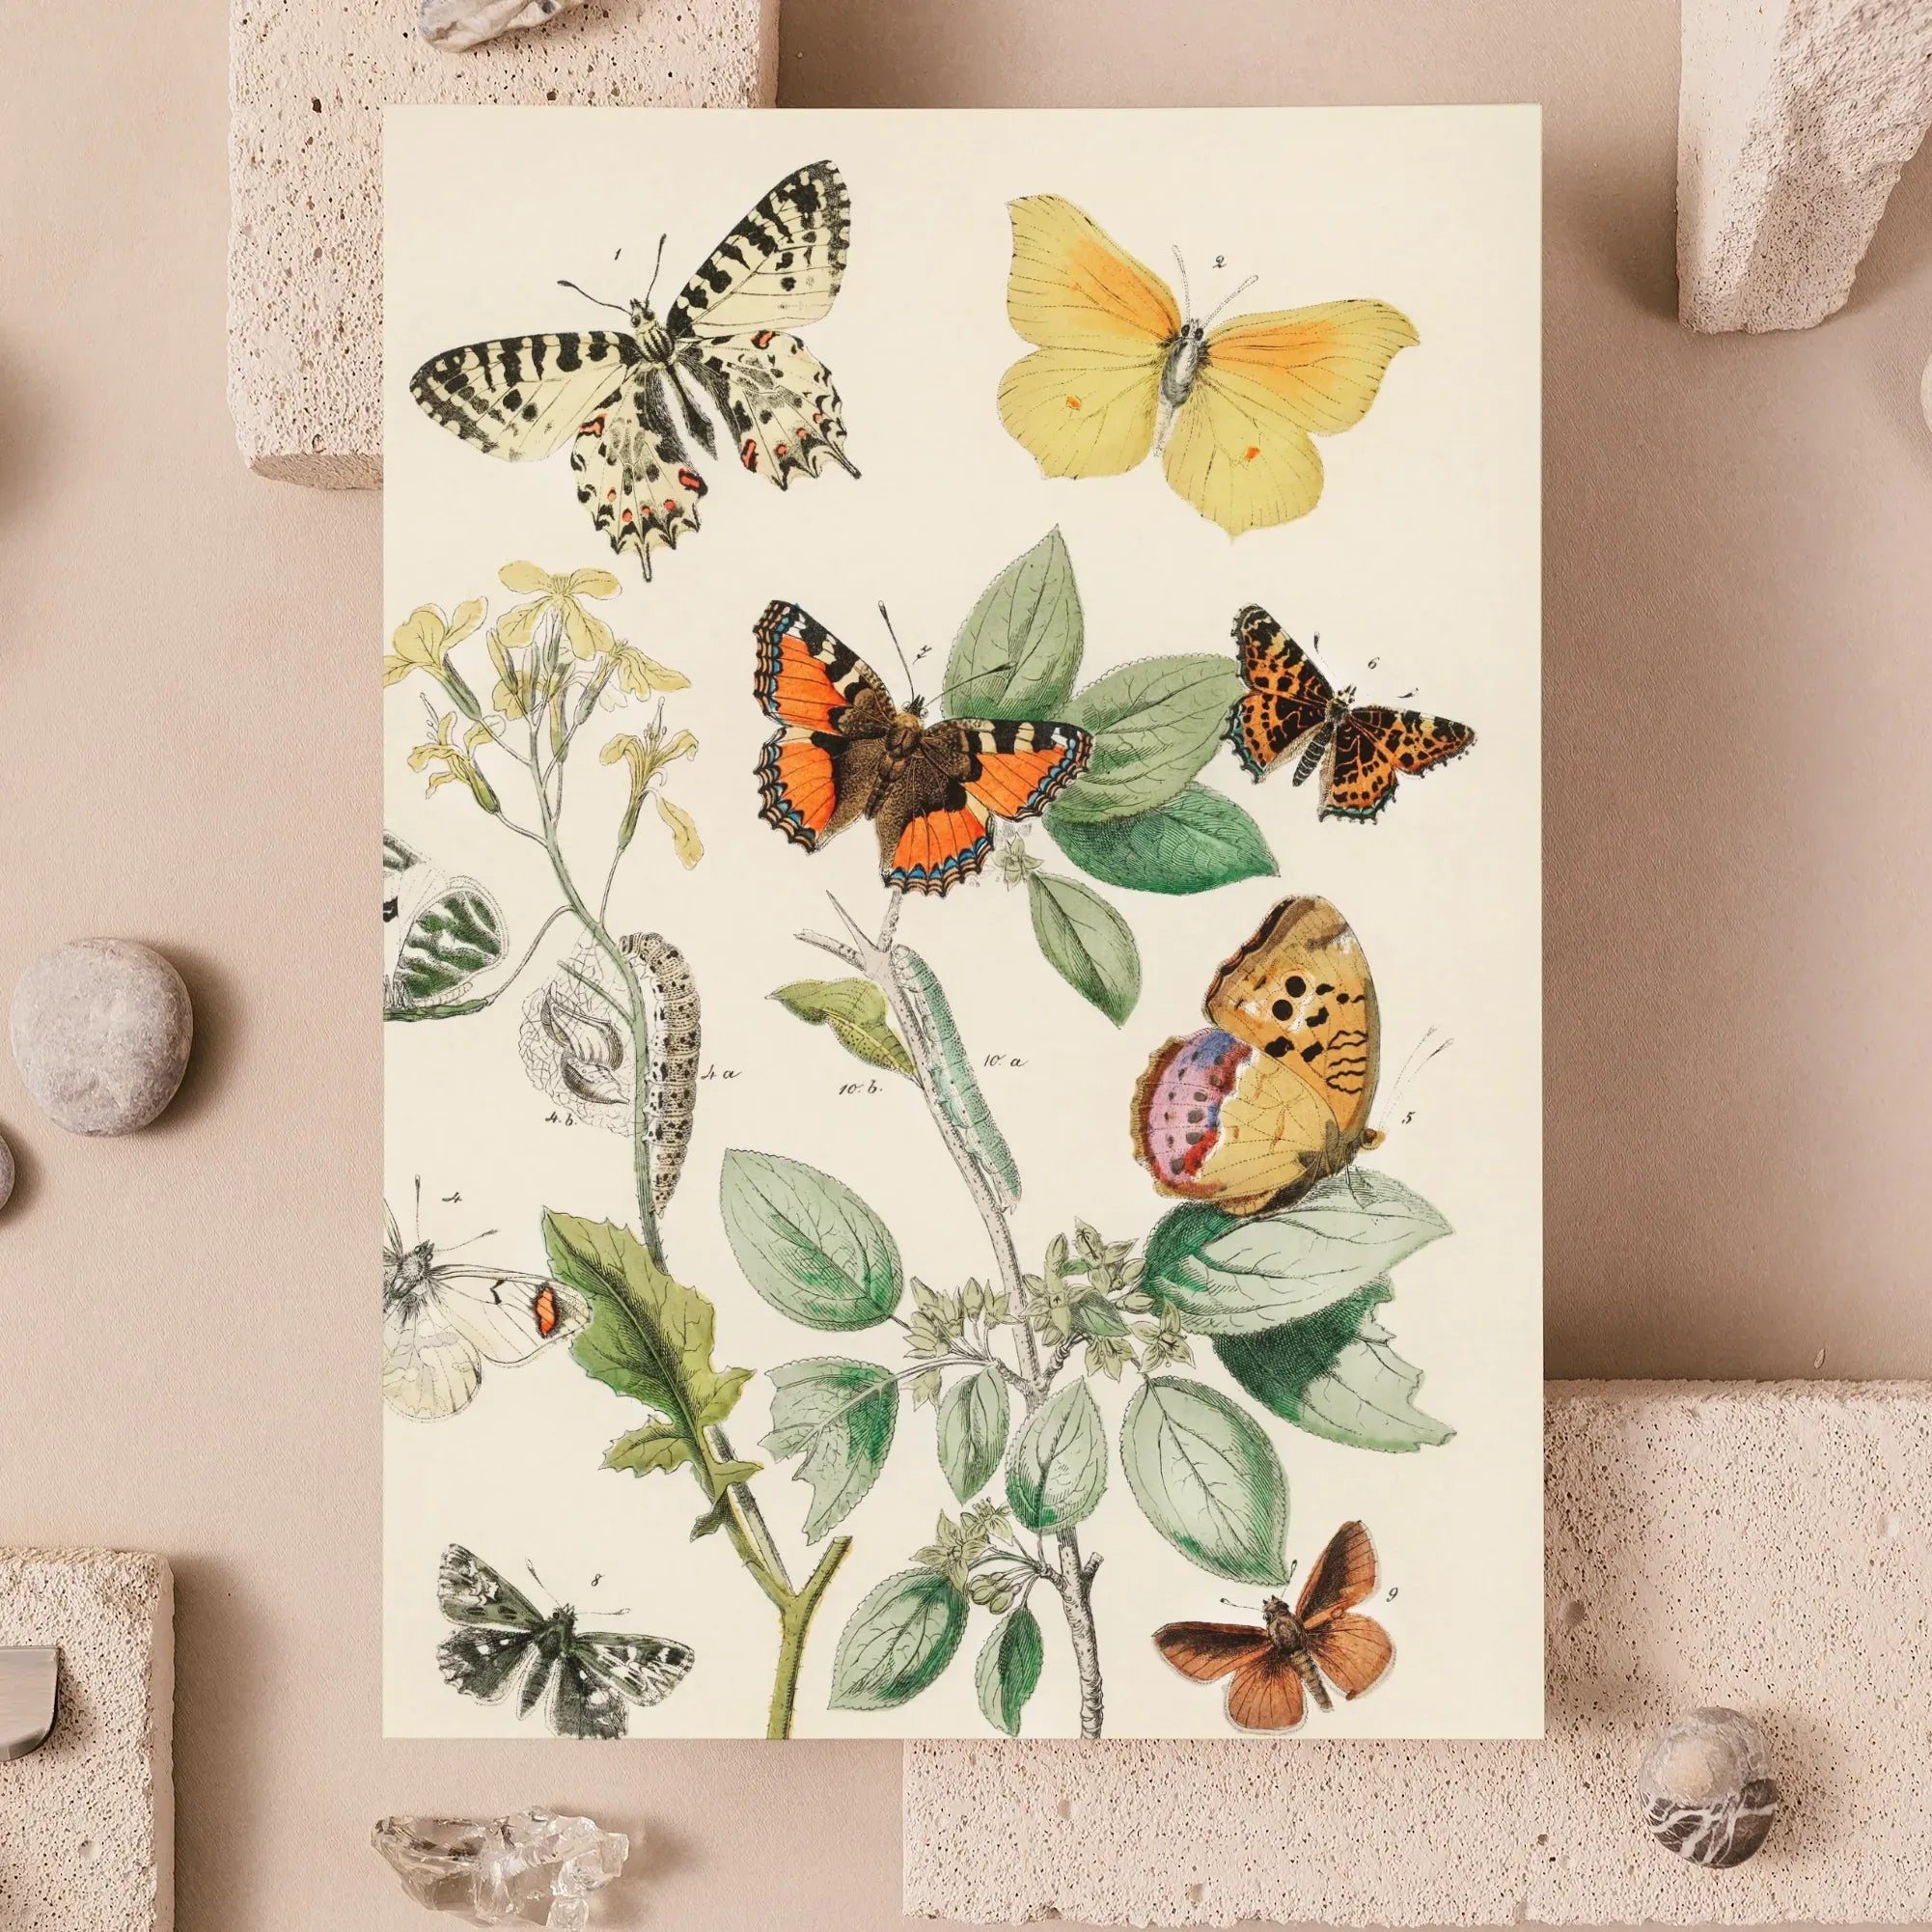 European Butterflies And Moths 3 By William Forsell Kirby Greeting Card - Greeting & Note Cards - Aesthetic Art